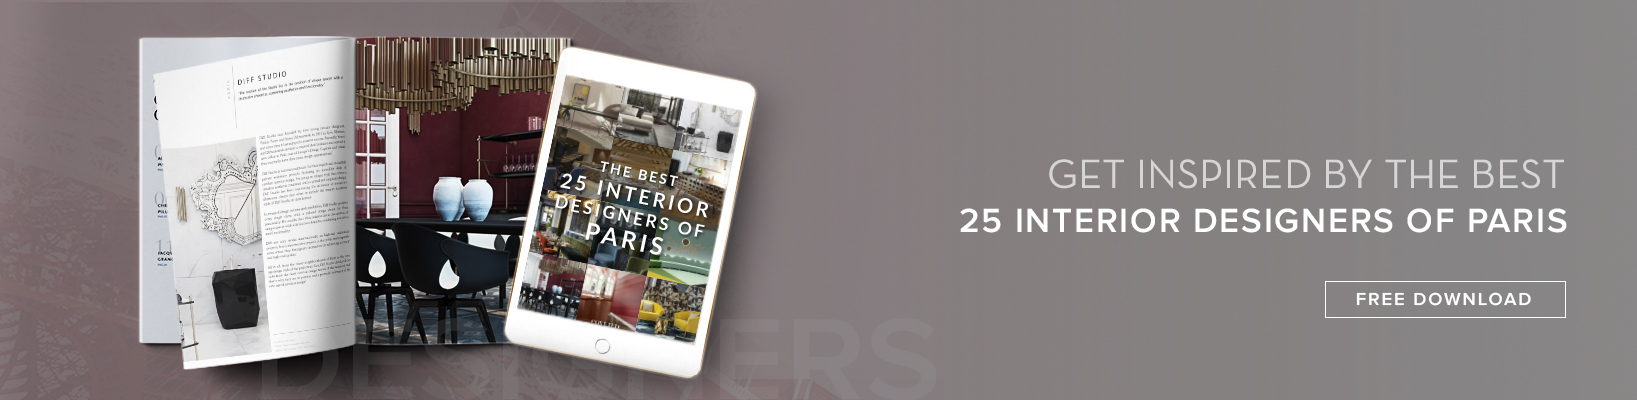 Ebook Paris Top Designers laure nell interiors Creative Thinking &#8211; The Way Of Laure Nell Interiors banner 203 20